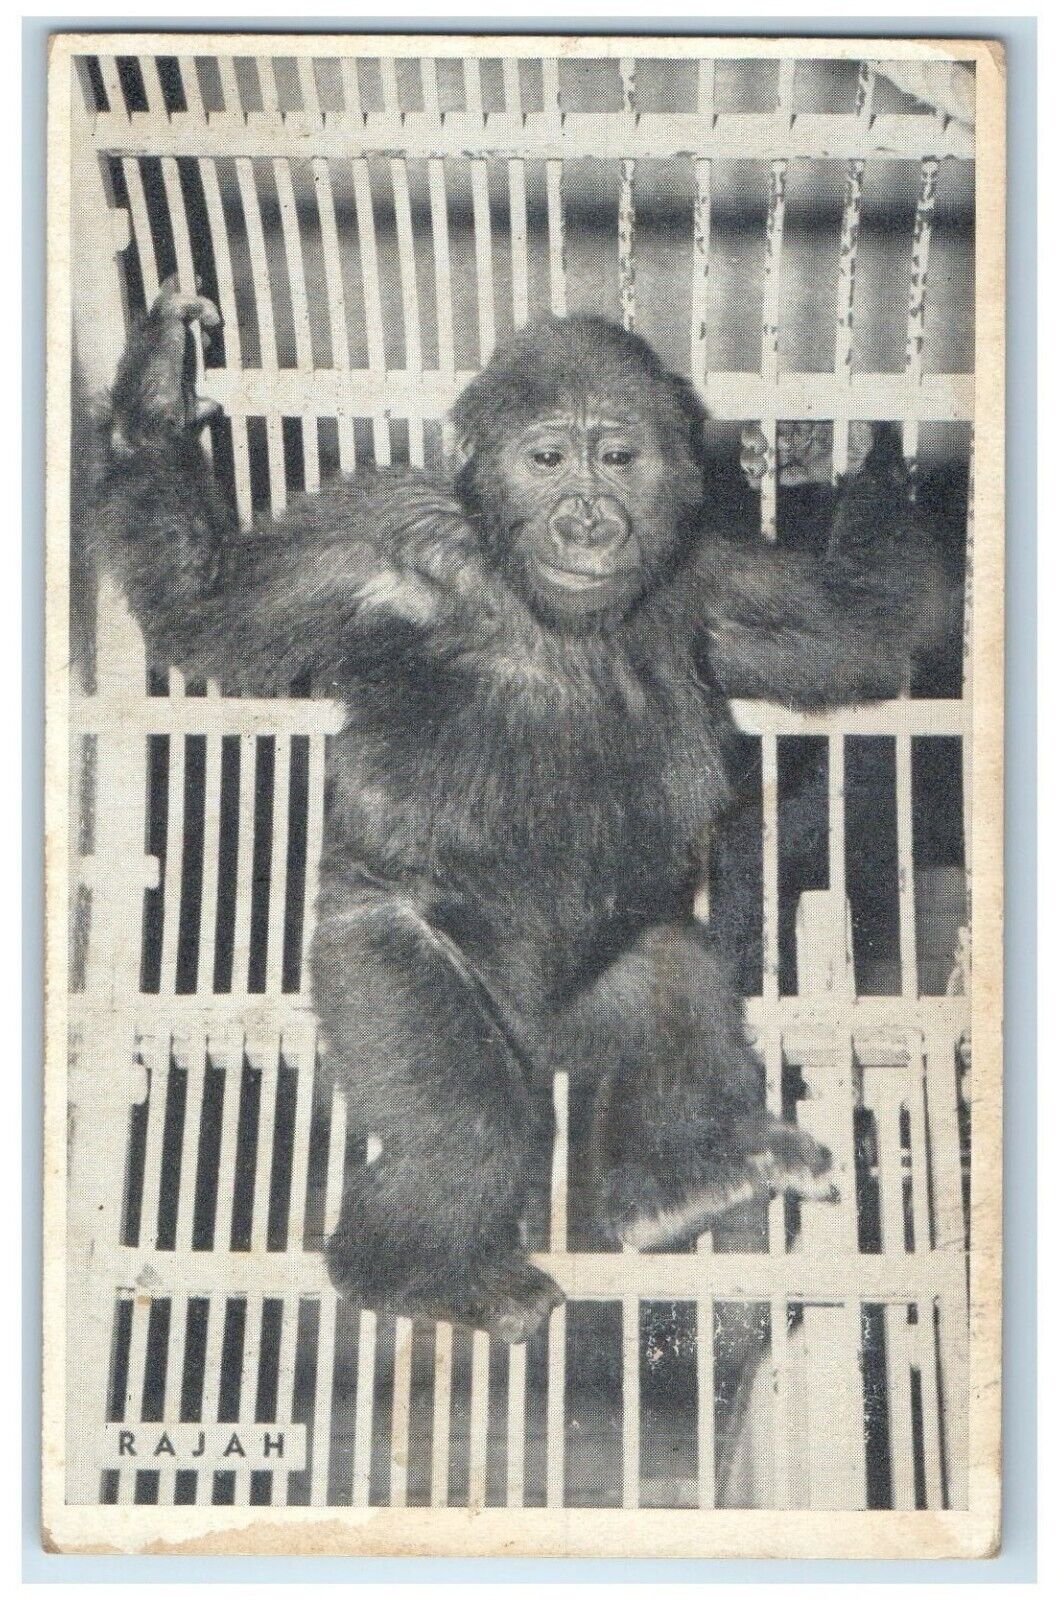 Rajah Male Gorilla From French Cameron West Africa Chicago Illinois IL Postcard